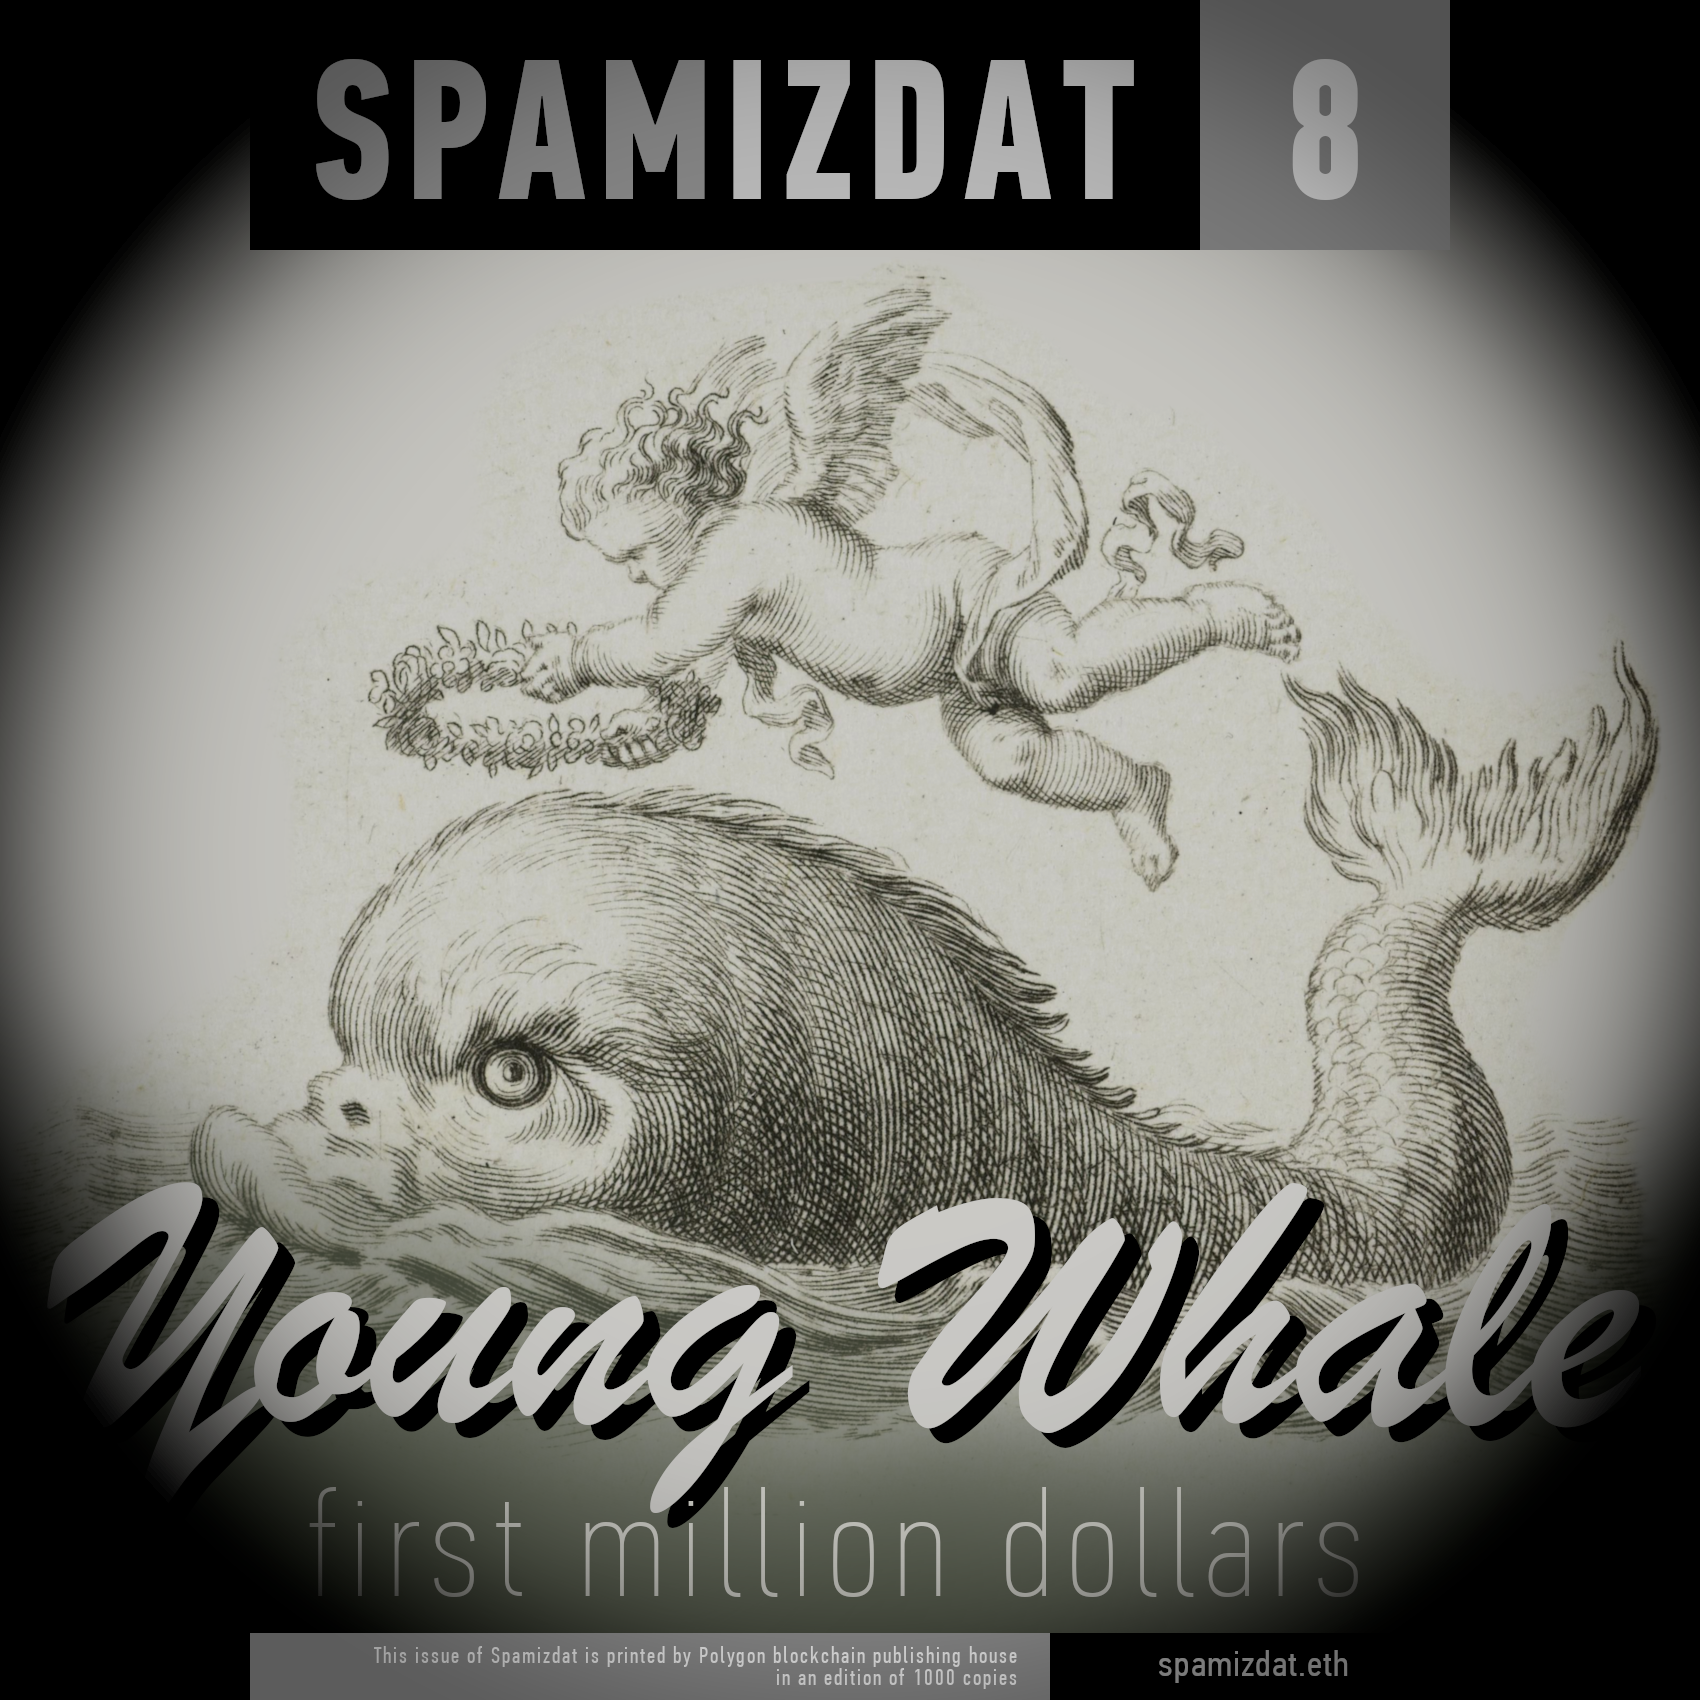 Spamizdat 8 - YOUNG WHALE